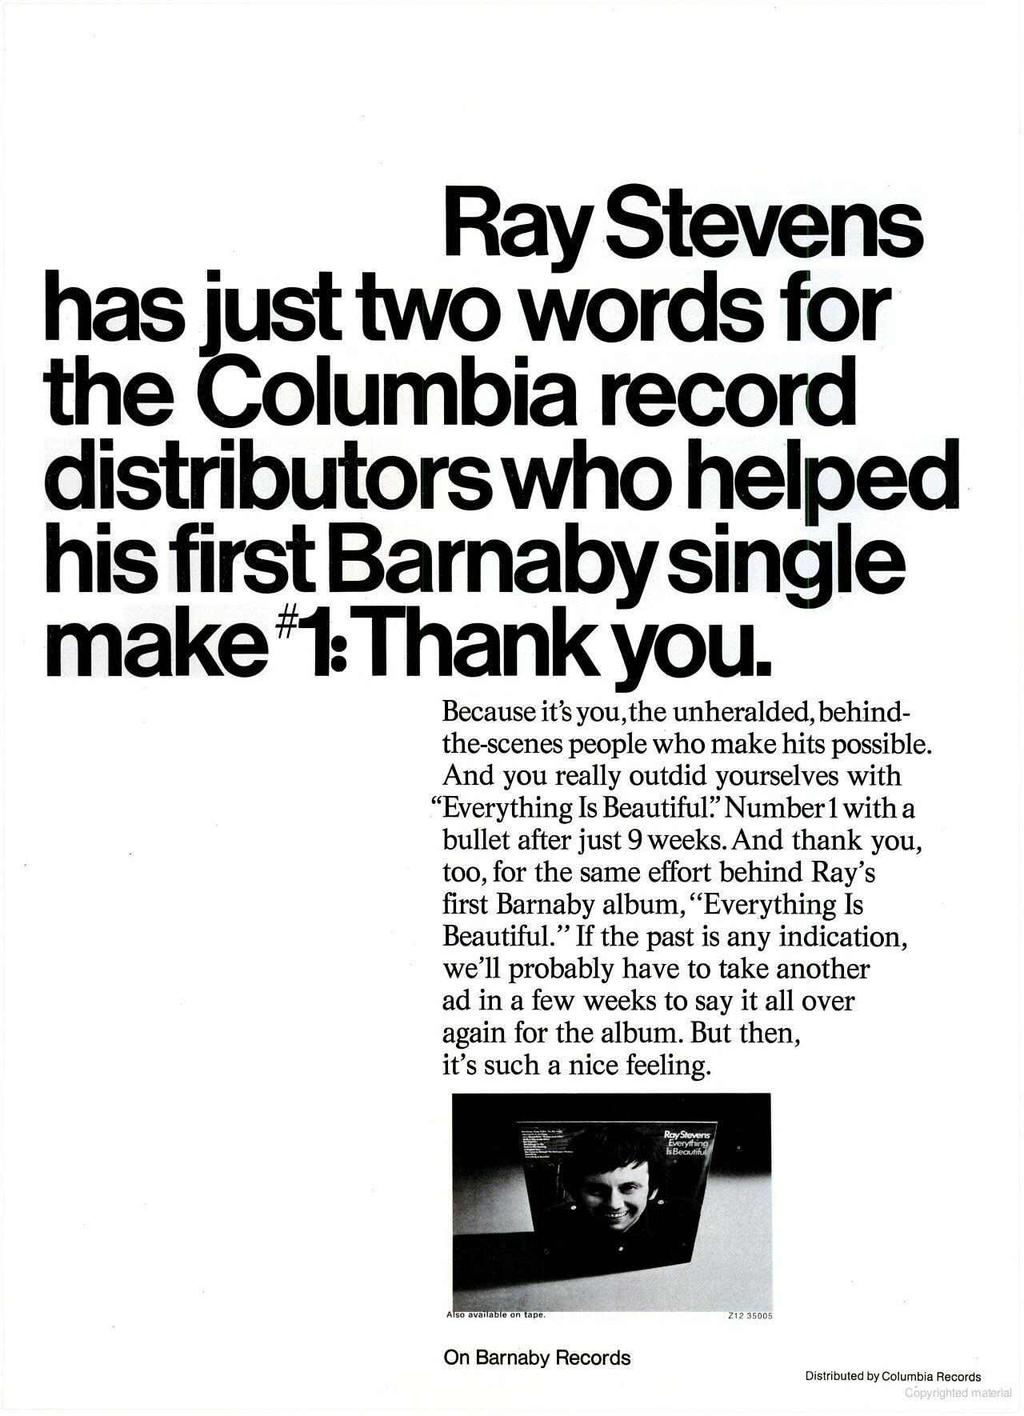 Ray Stevens has just two words for the Columbia record distributors who helped his first Barnaby single make 1:Thank you.